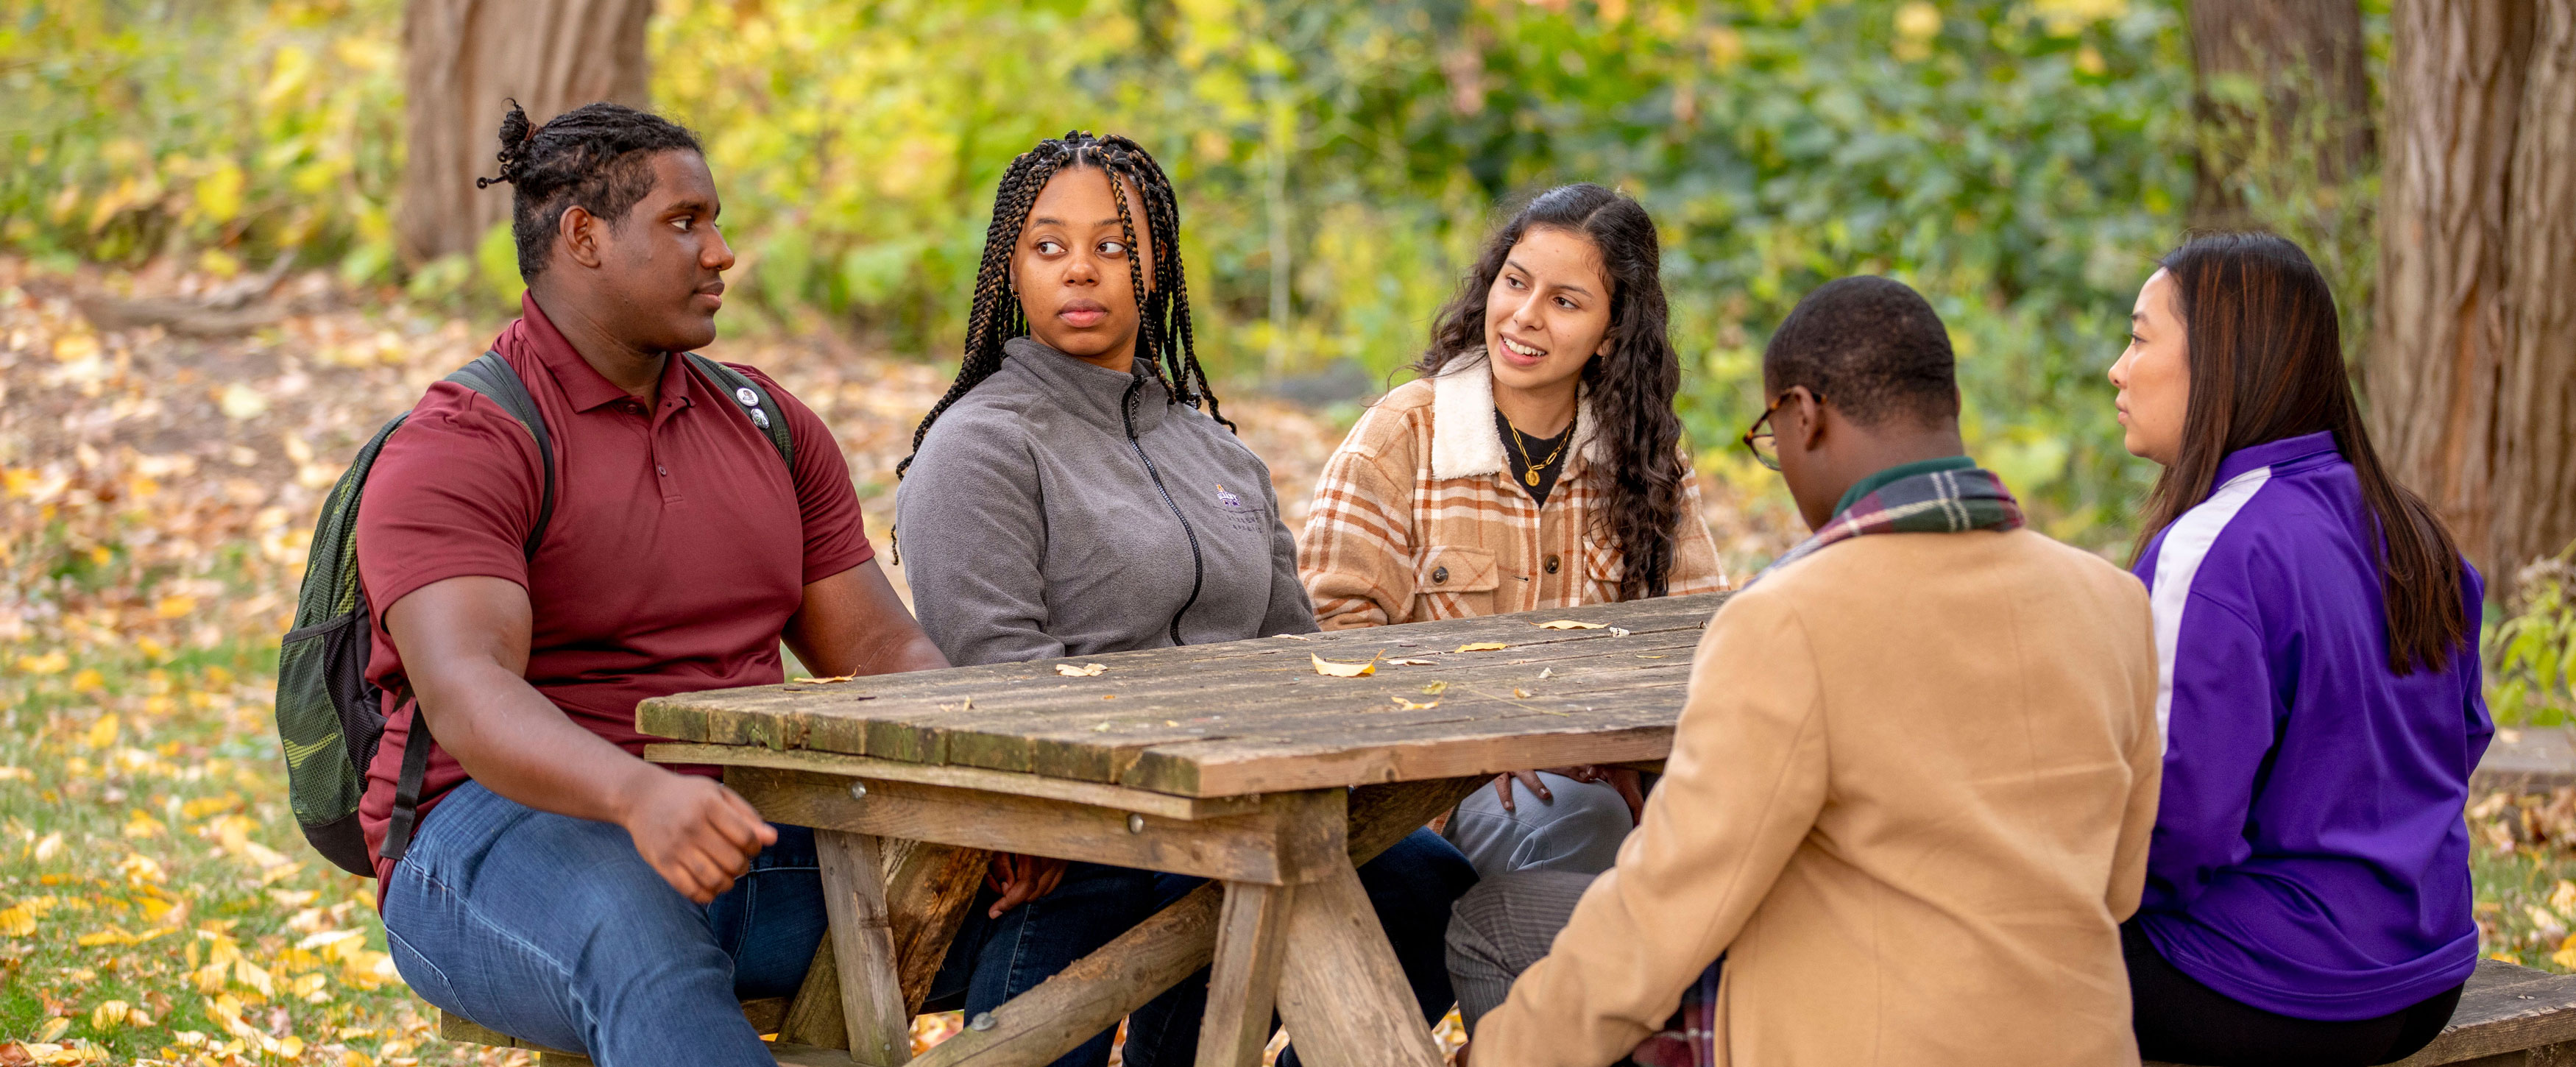 Five students sit and talk at a picnic table outside under trees with fall foliage.